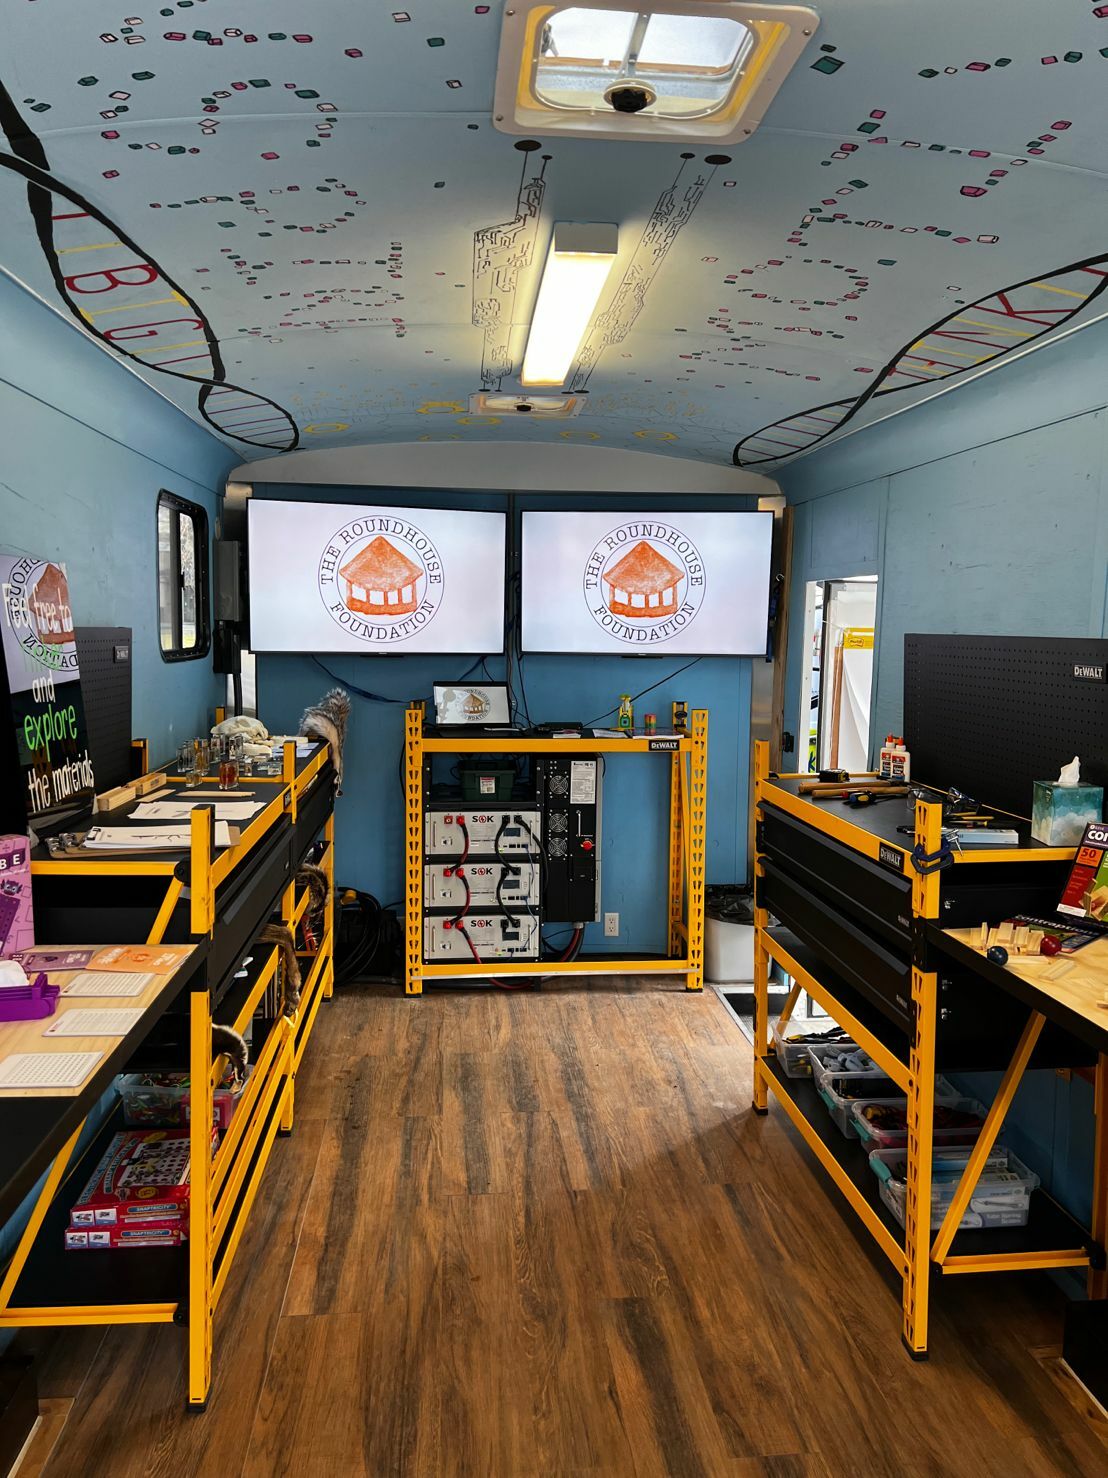 The interior of the GO STEM Mobile Maker Lab. Photo courtesy of David Melville.